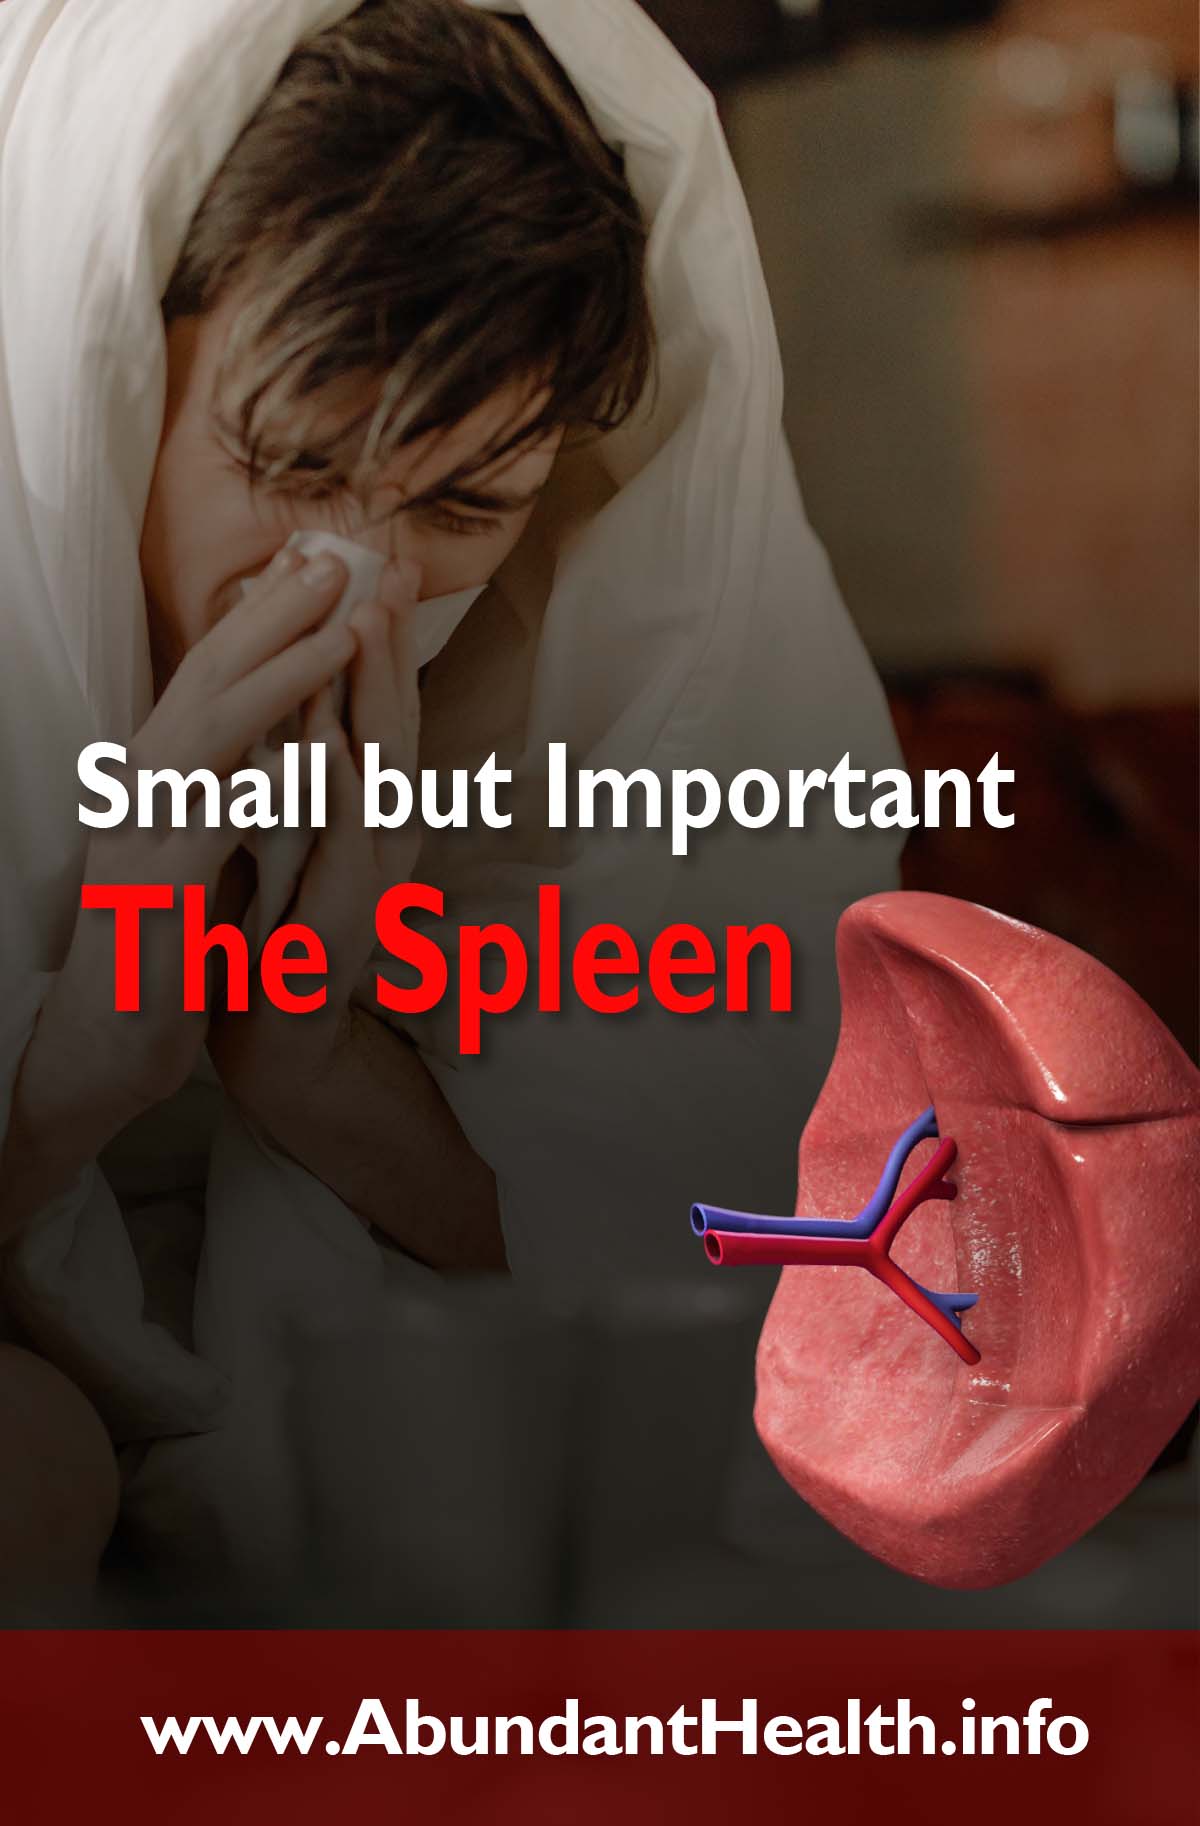 Small but Important - The Spleen